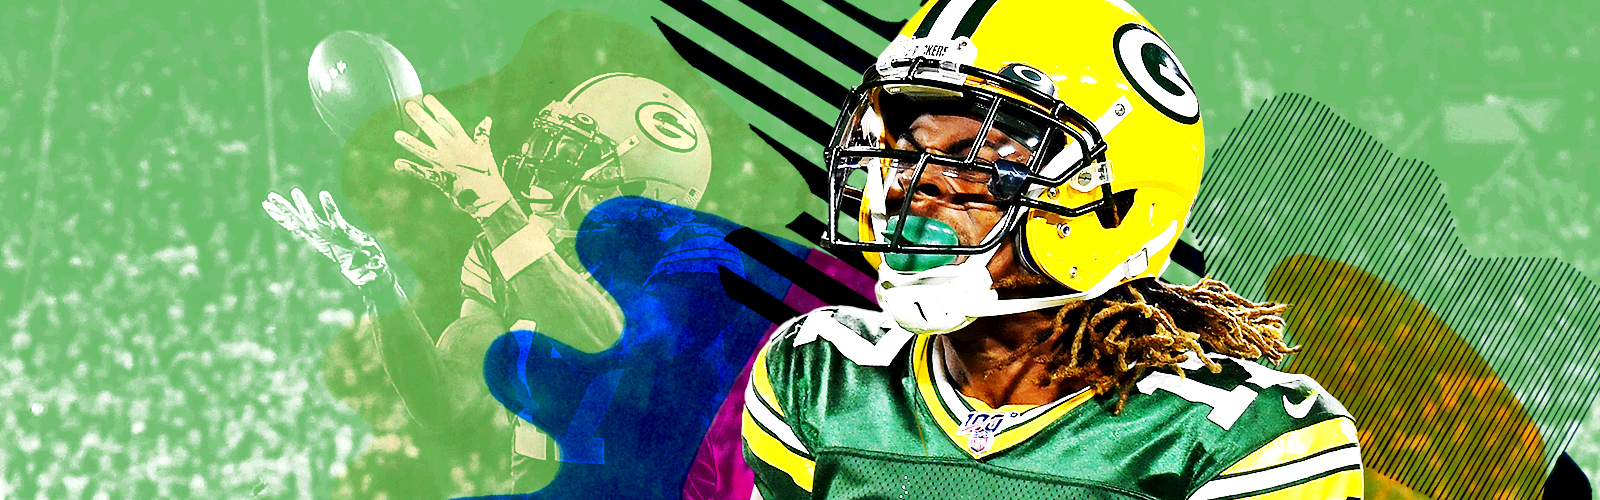 Davante Adams On How The Packers Bounce Back And His Favorite Young Receivers In The NFL